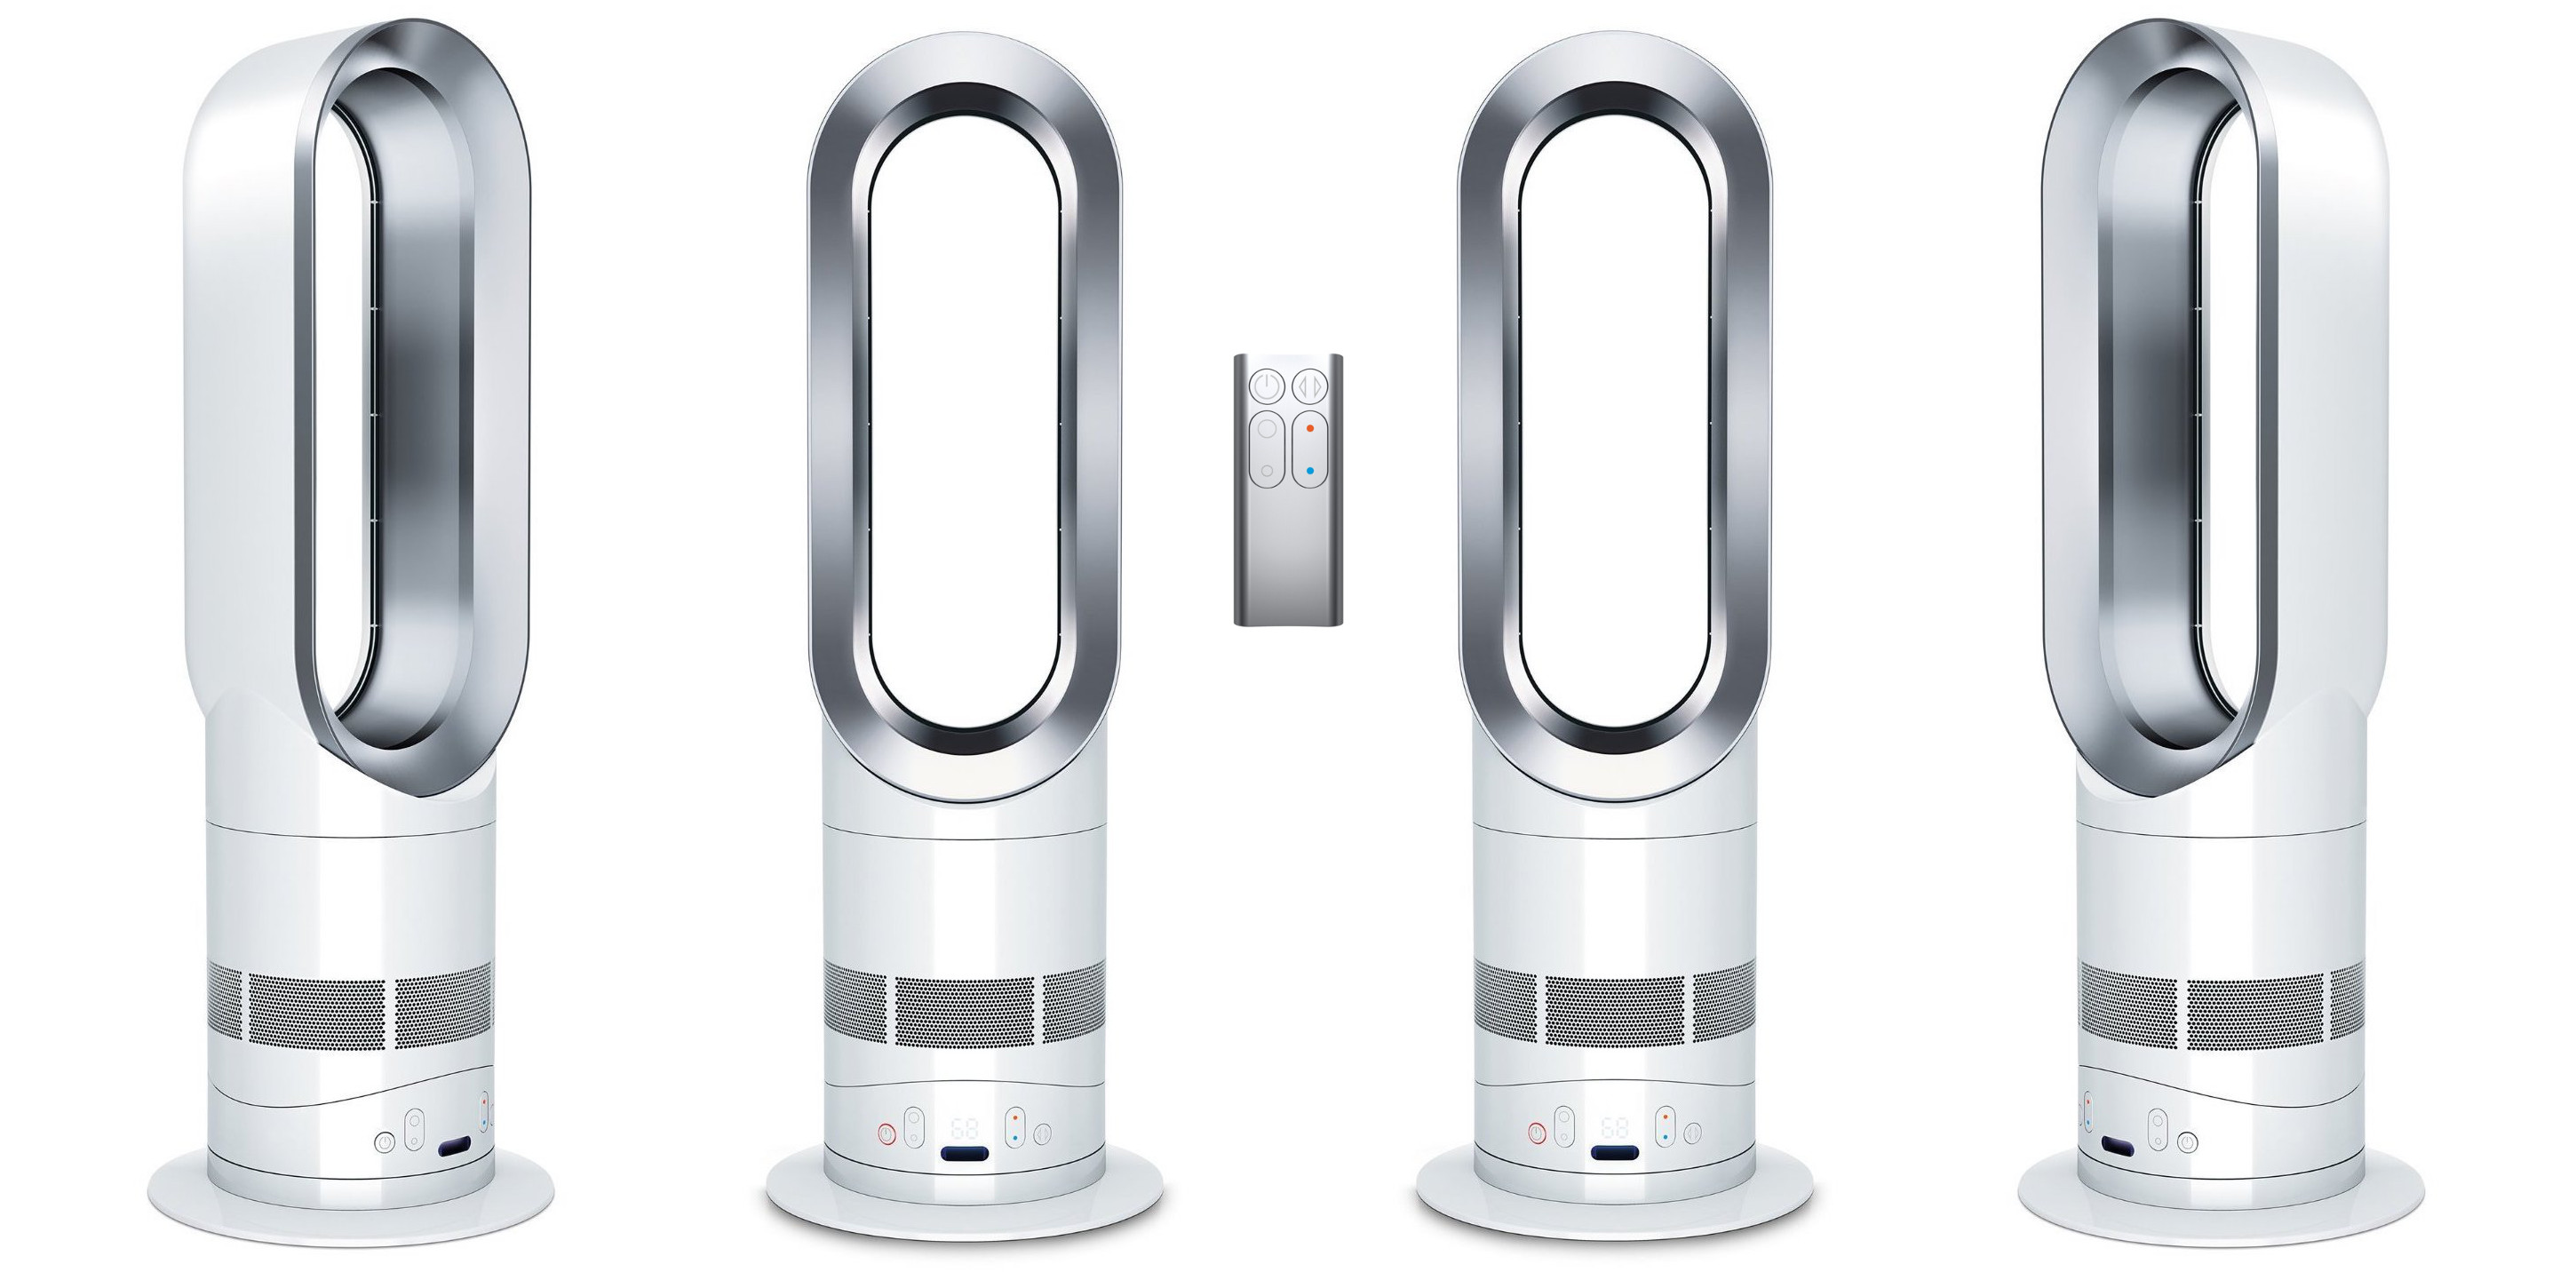 For today only, Amazon has the Dyson AM05 Hot + Cool Fan